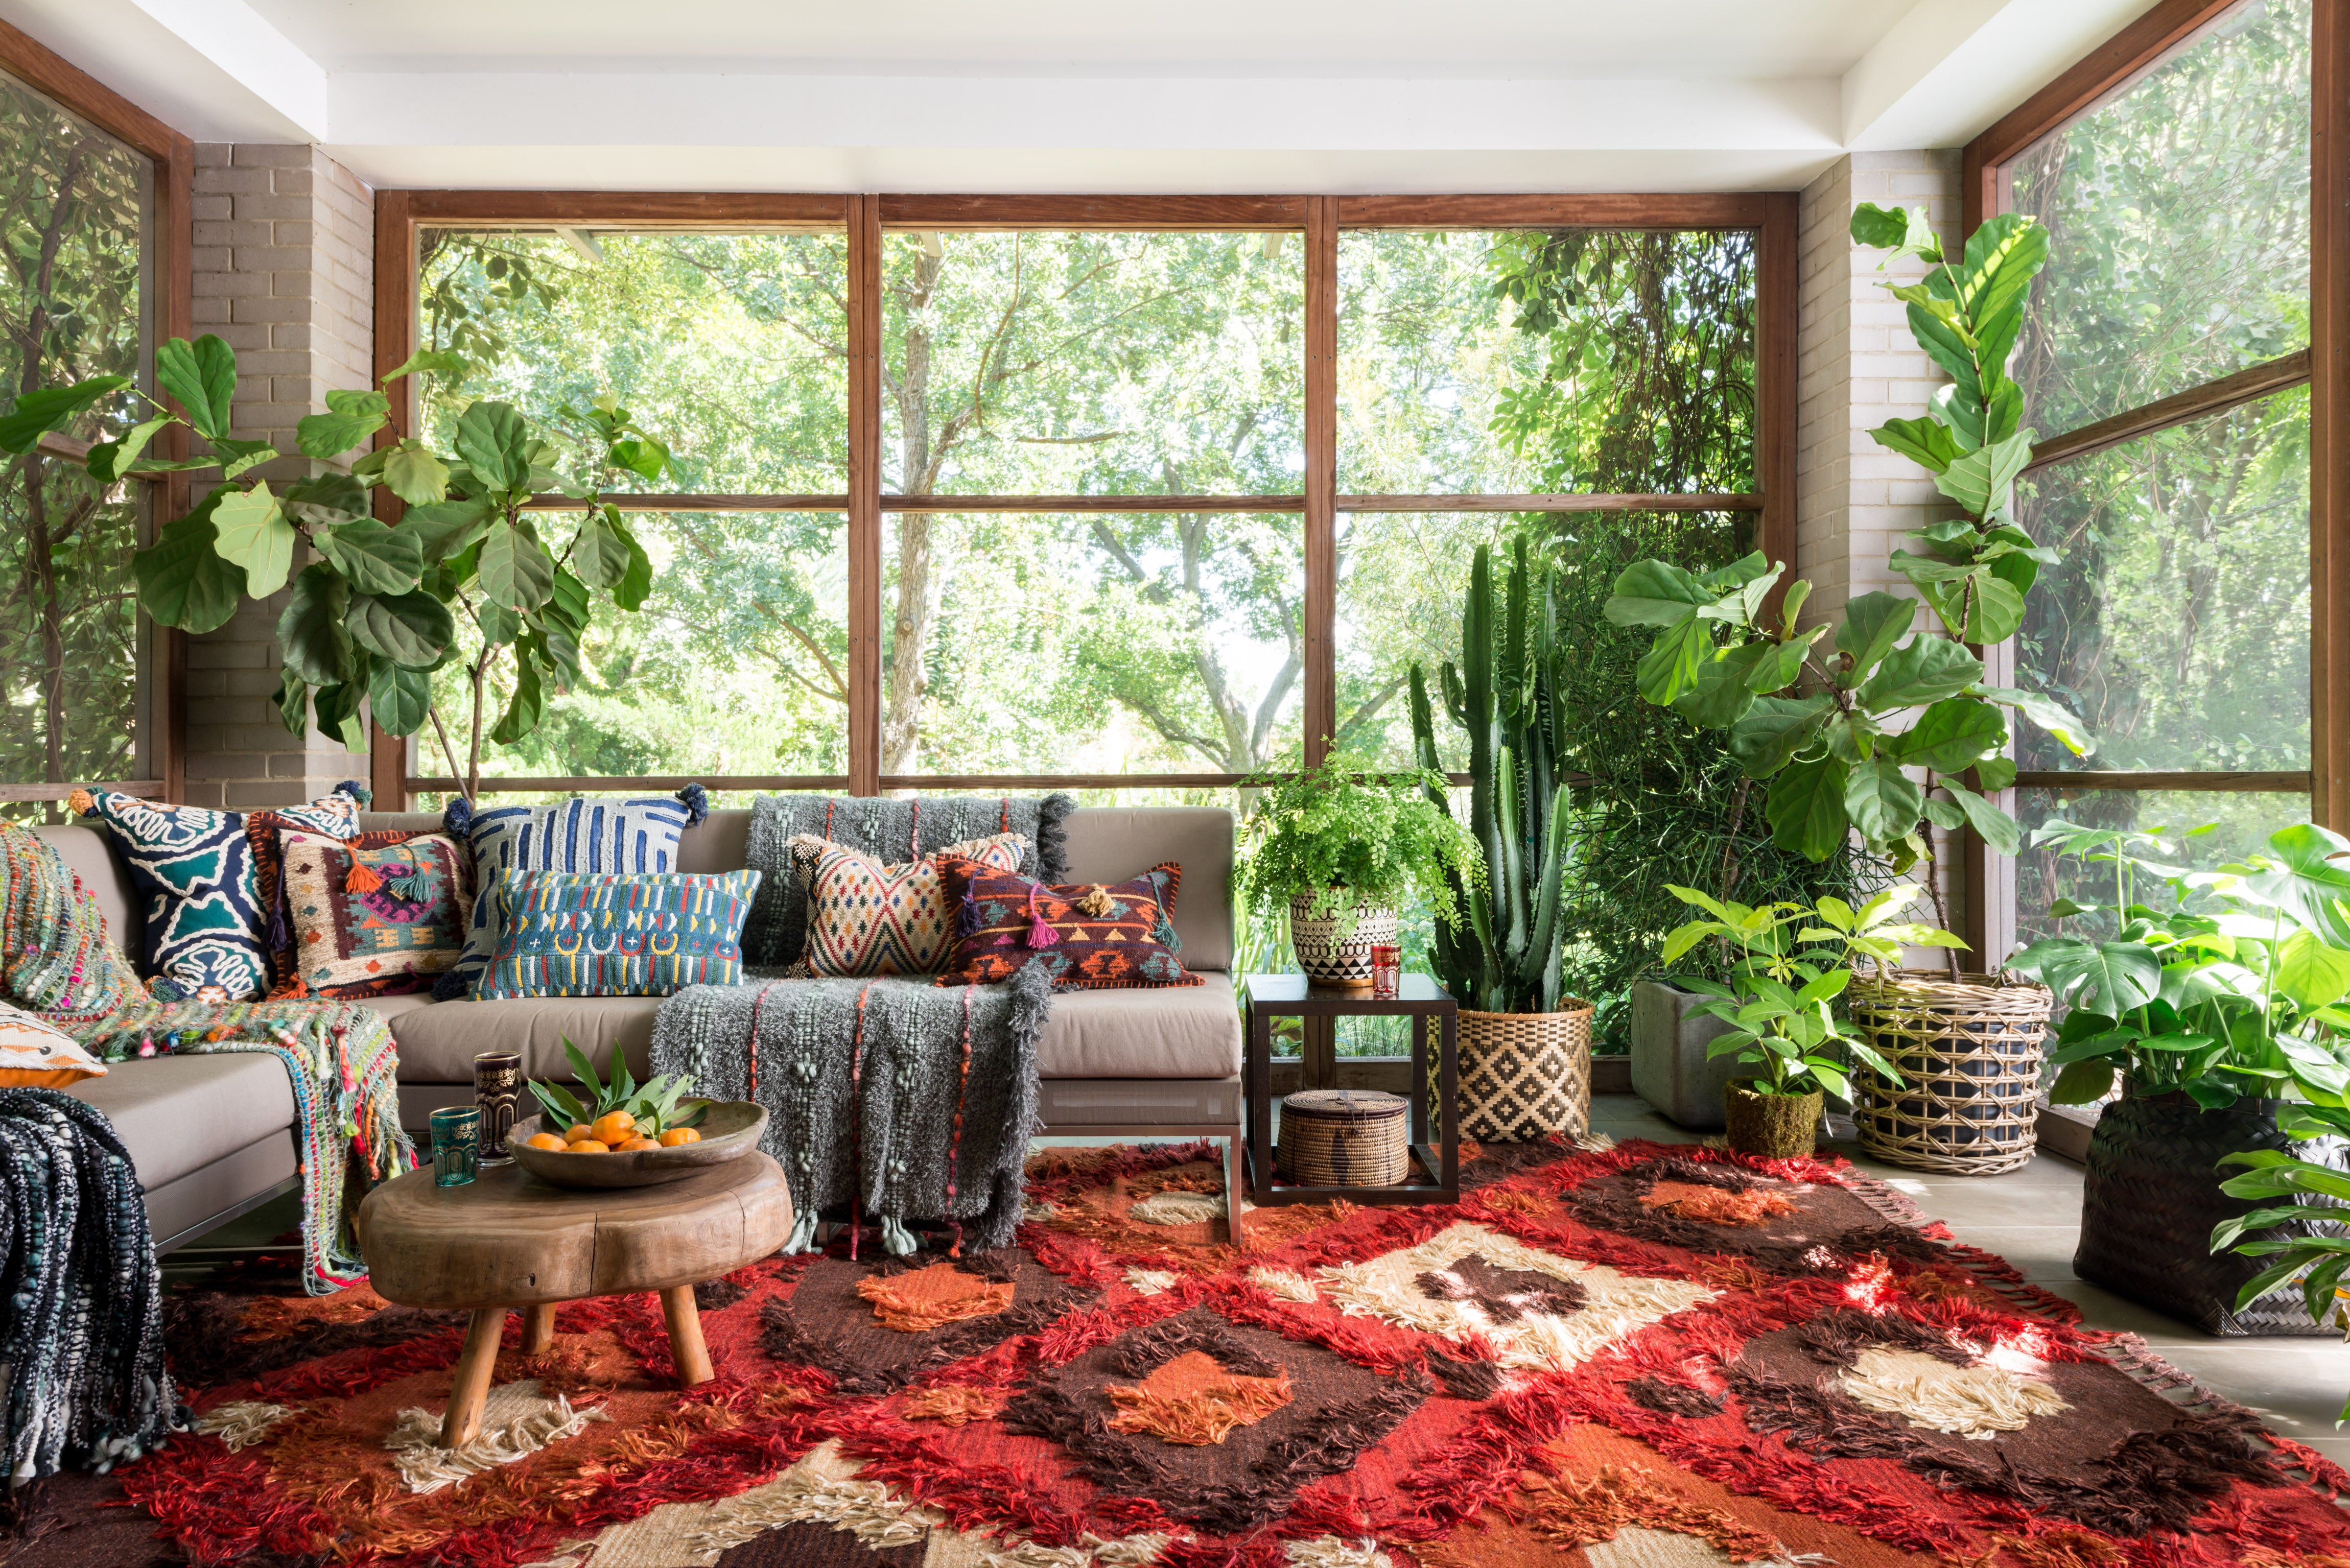 a red and brown diamond patterned shag rug is on the floor with greenery and floor to ceiling windows on three walls. There is a modern grey couch with bohemian textural pillows and blankets. 